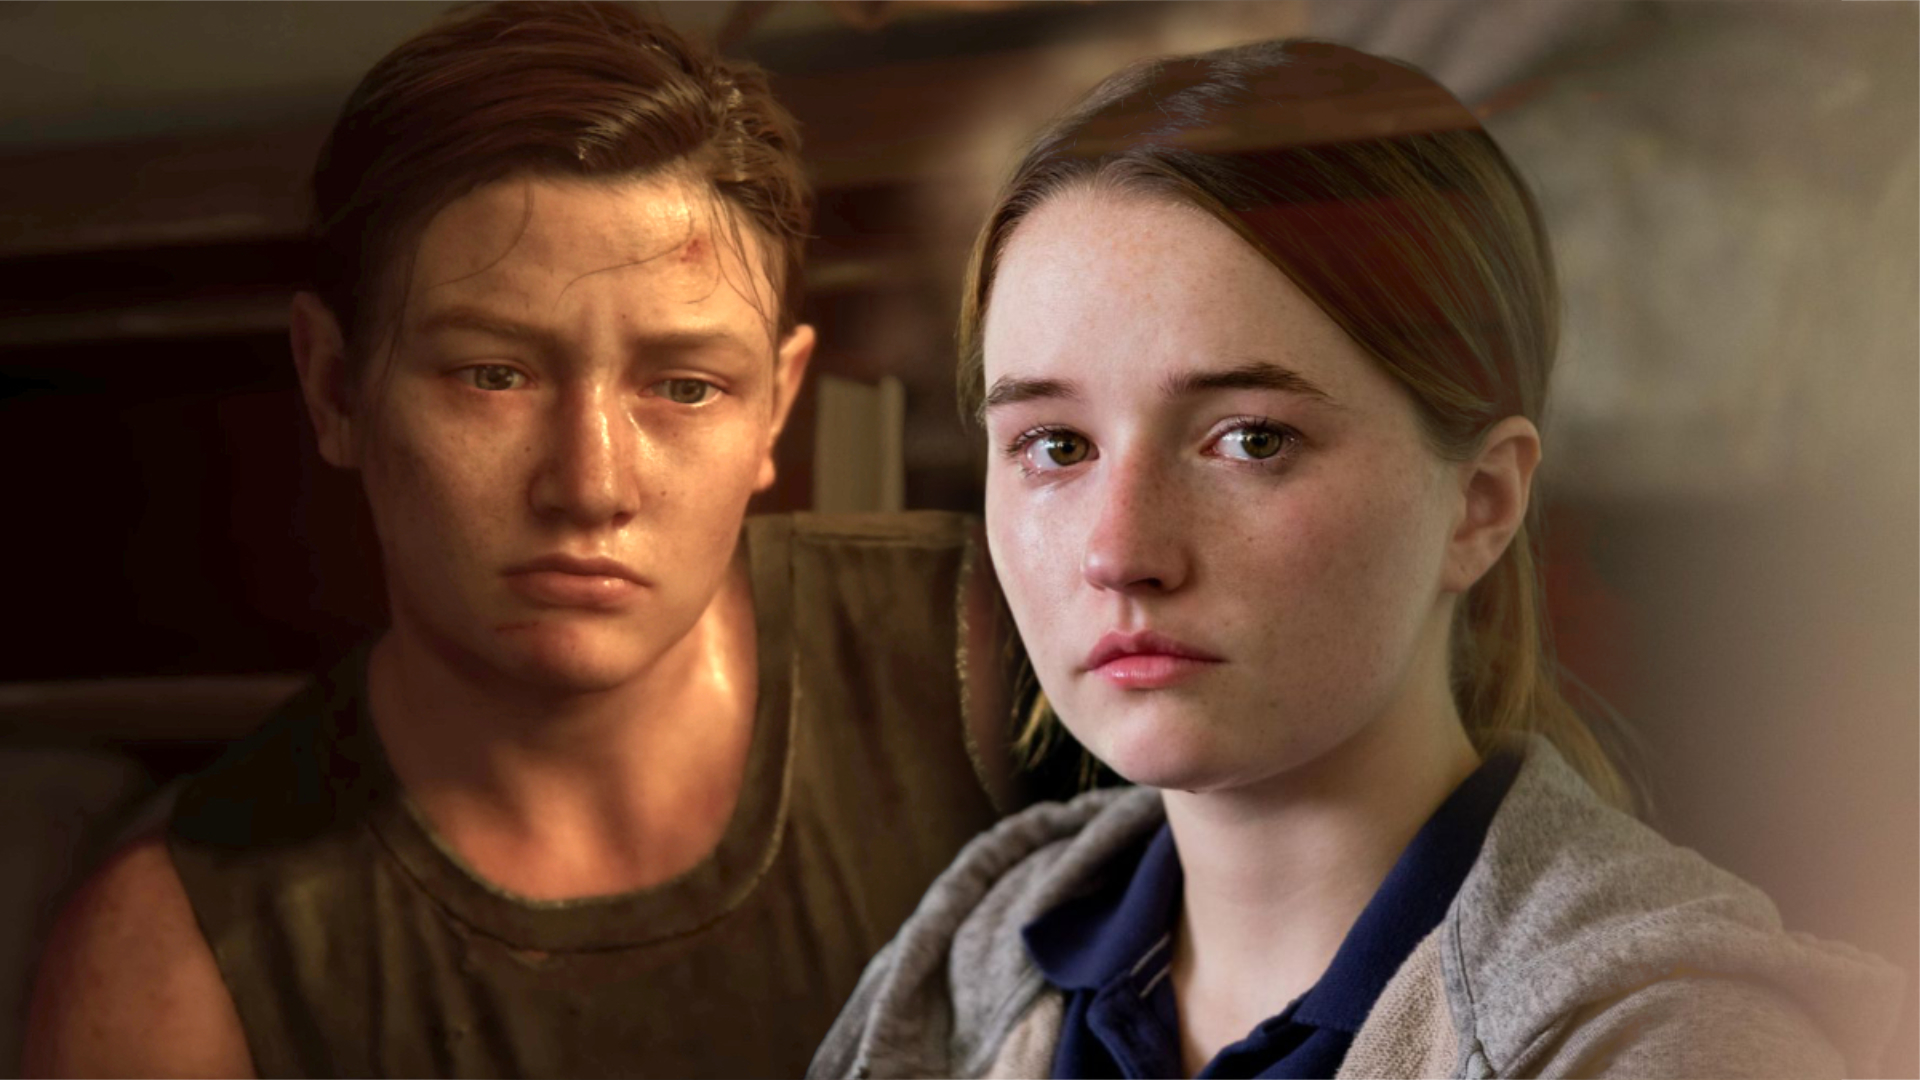 THE LAST OF US Season 2 Has Reportedly Cast Abby - And We May Have